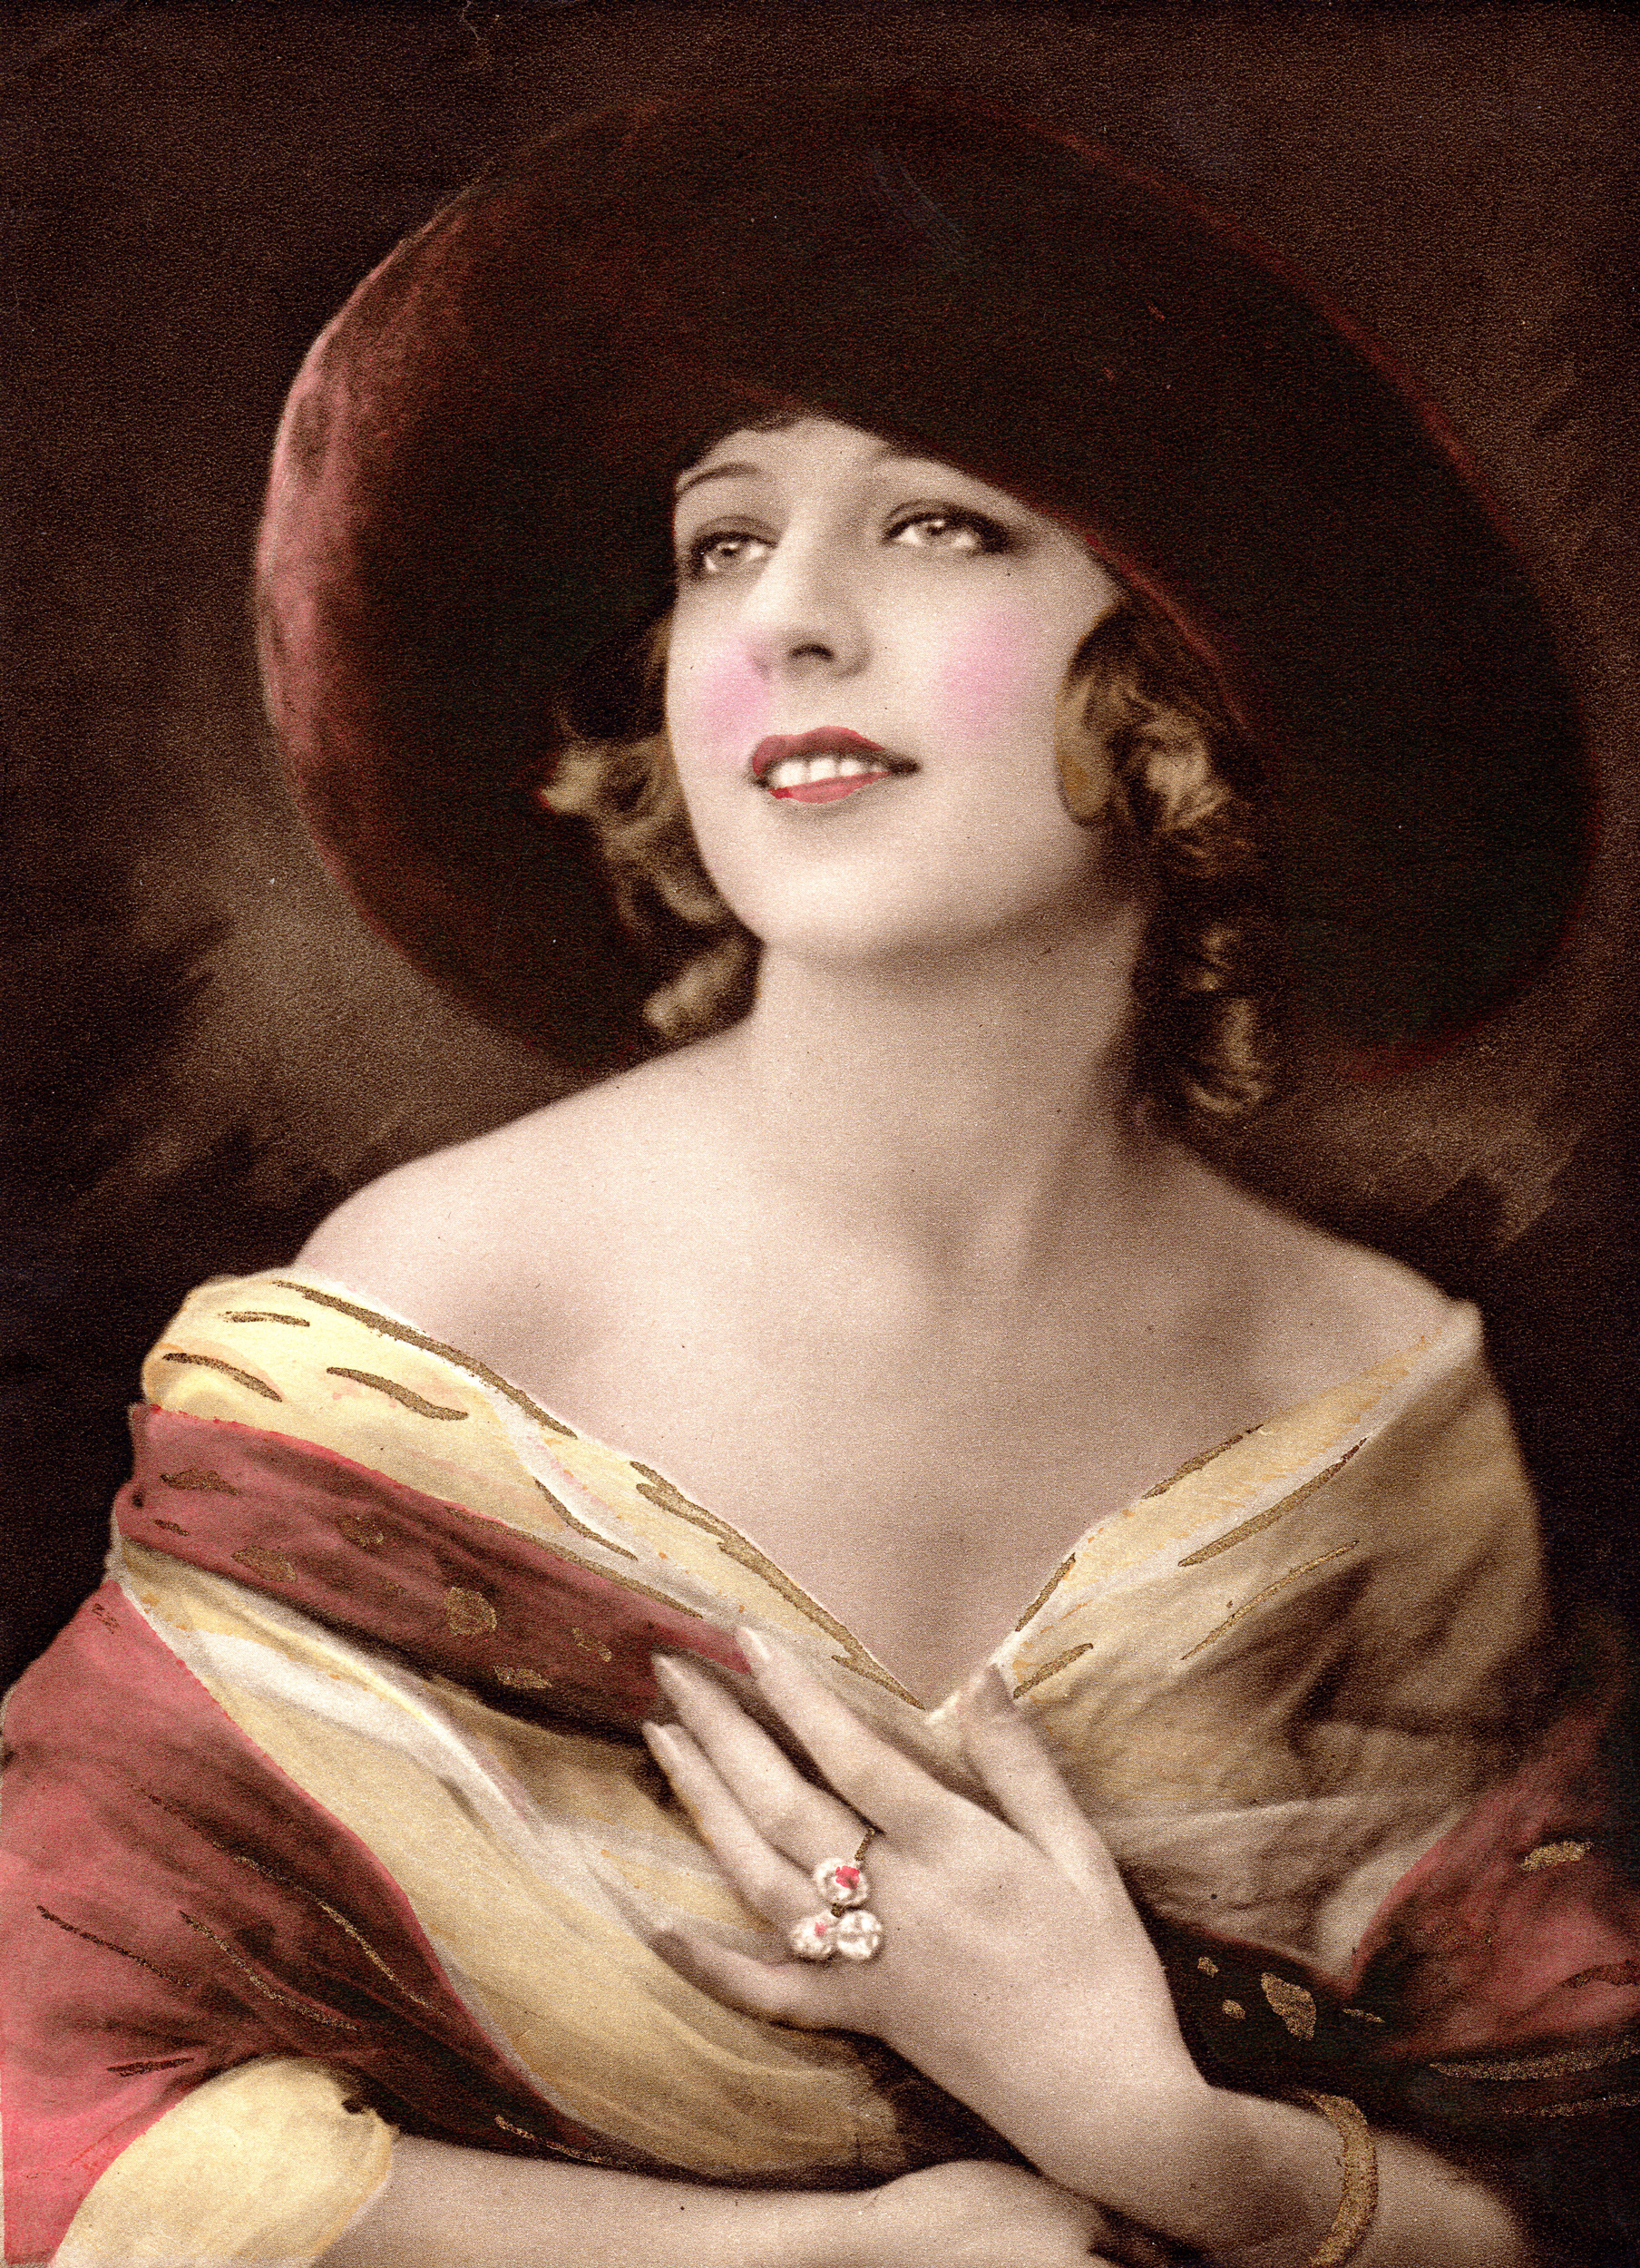 Hand-coloured German photogravure portraits from the early 20th century